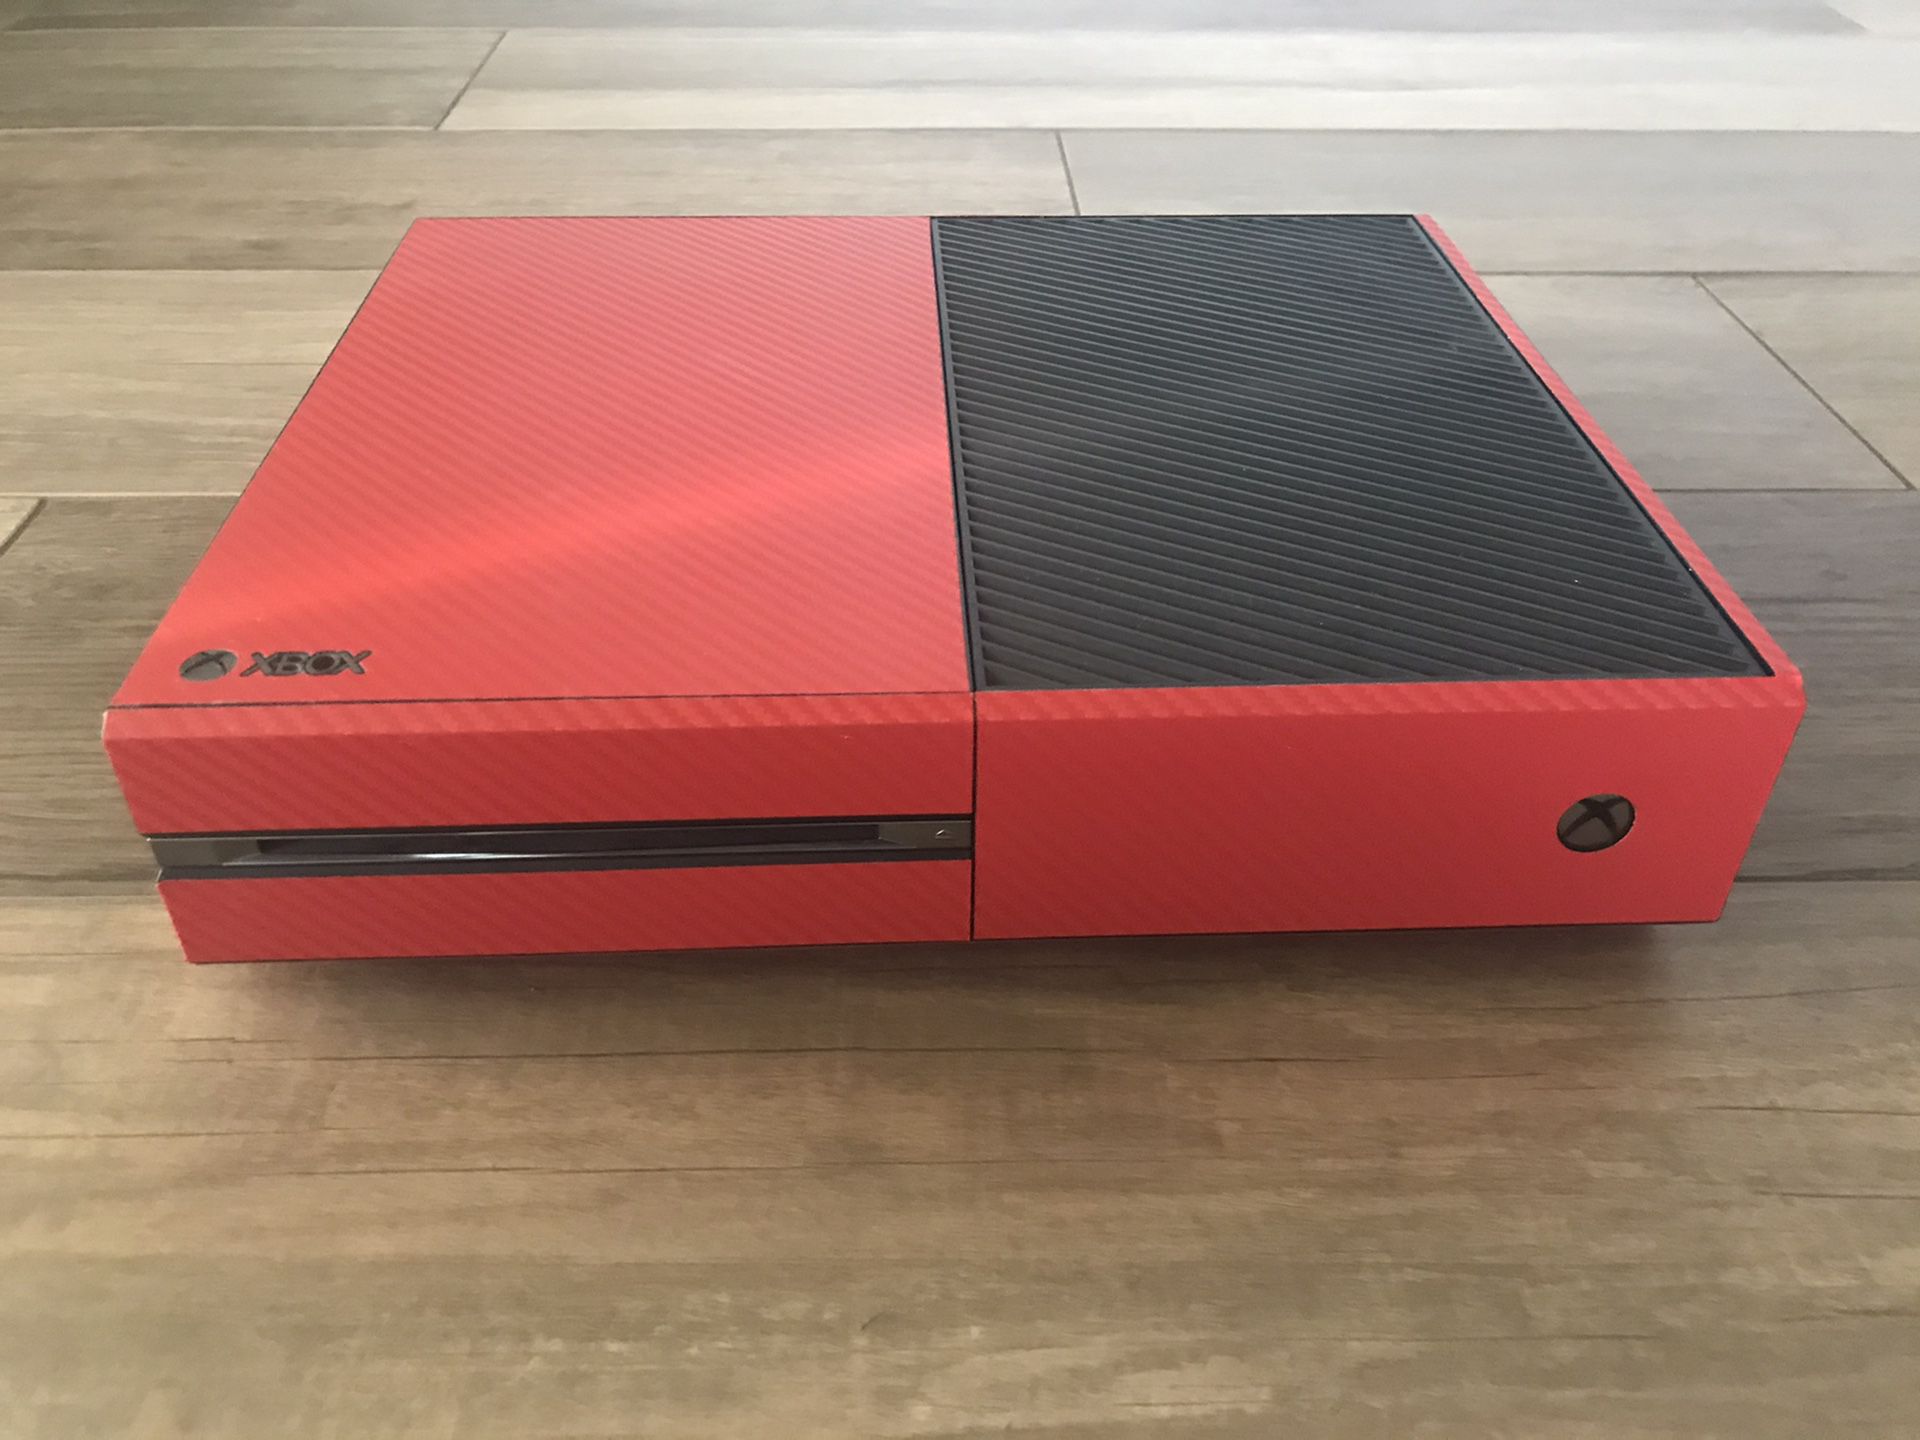 Red Carbon fiber Xbox One w/games